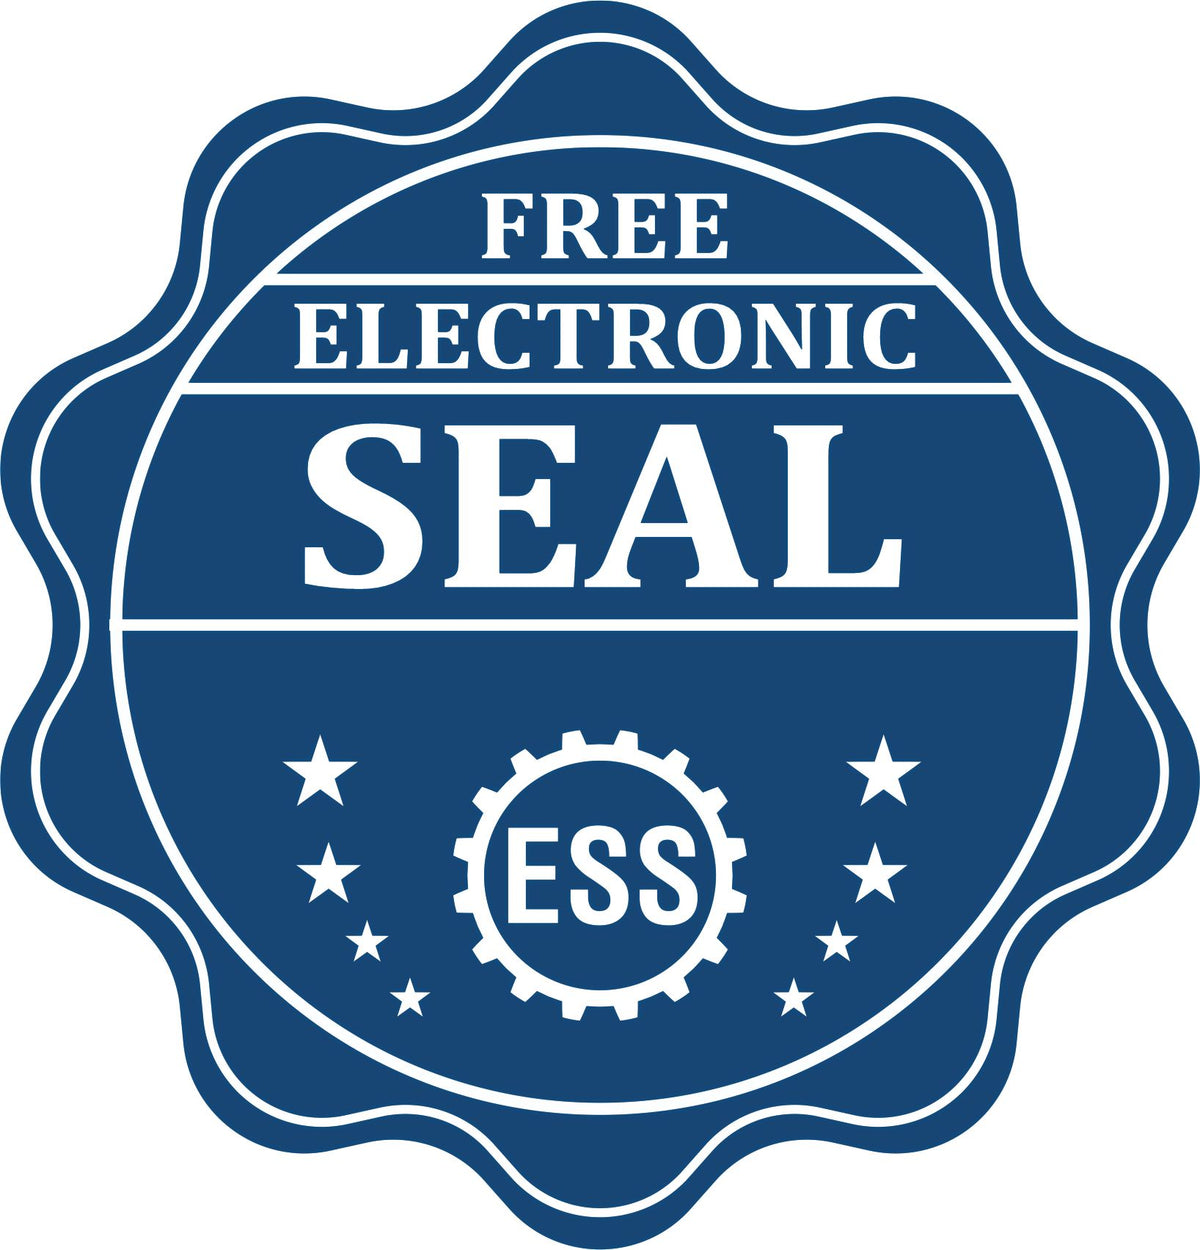 A badge showing a free electronic seal for the Hybrid Florida Landscape Architect Seal with stars and the ESS gear on the emblem.